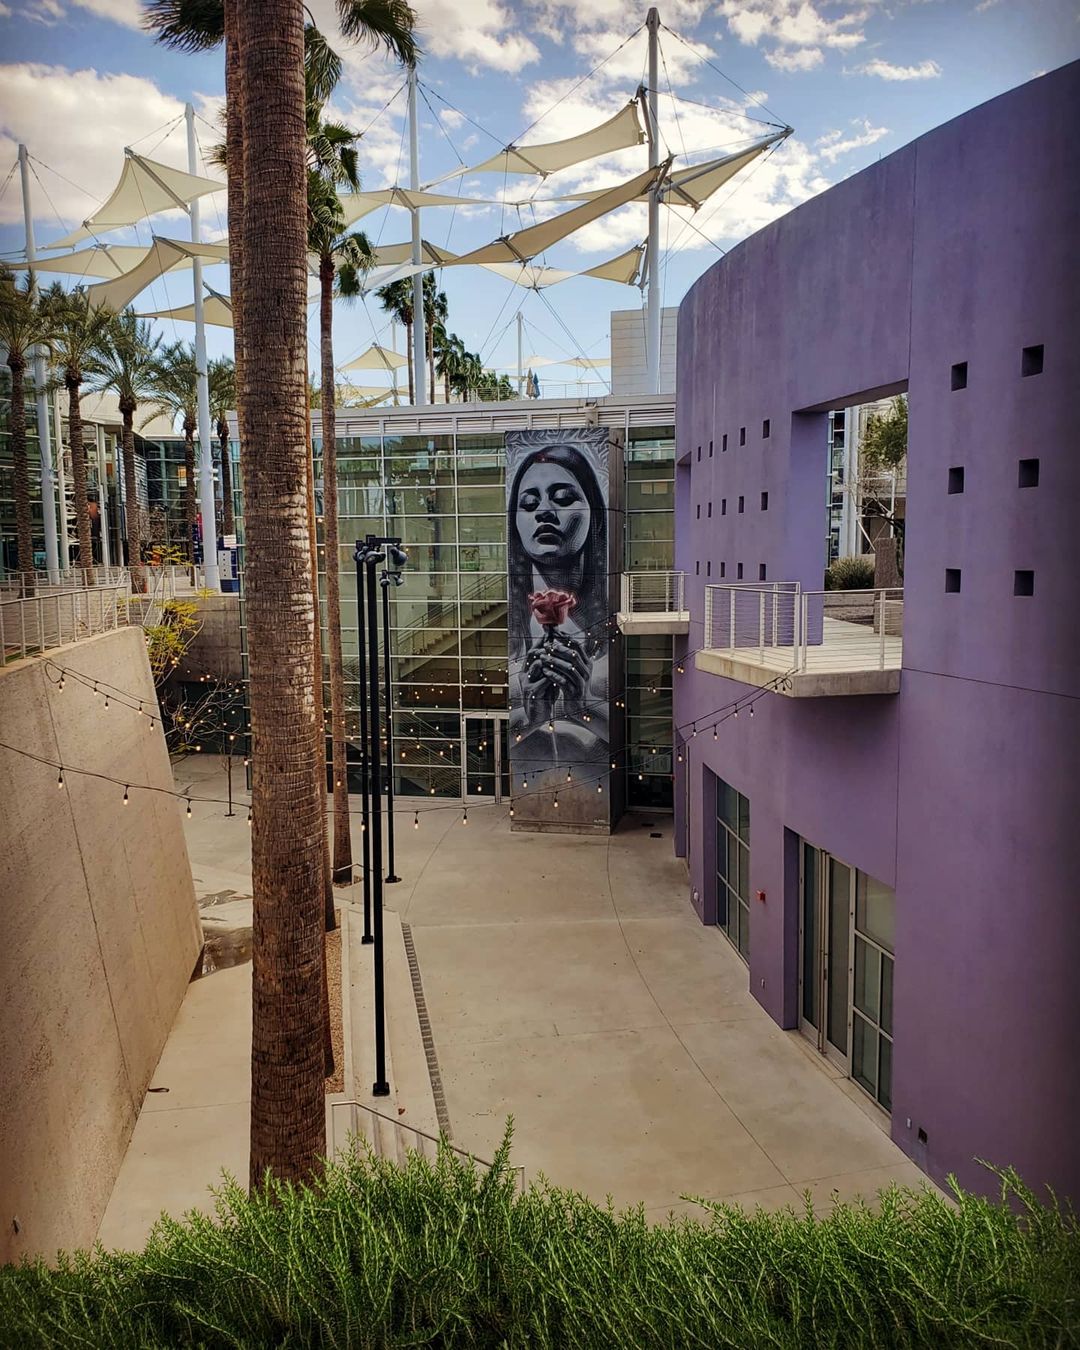 Exterior Photo of the Mesa Arts Center. Photo by Instagram user @dmotes25